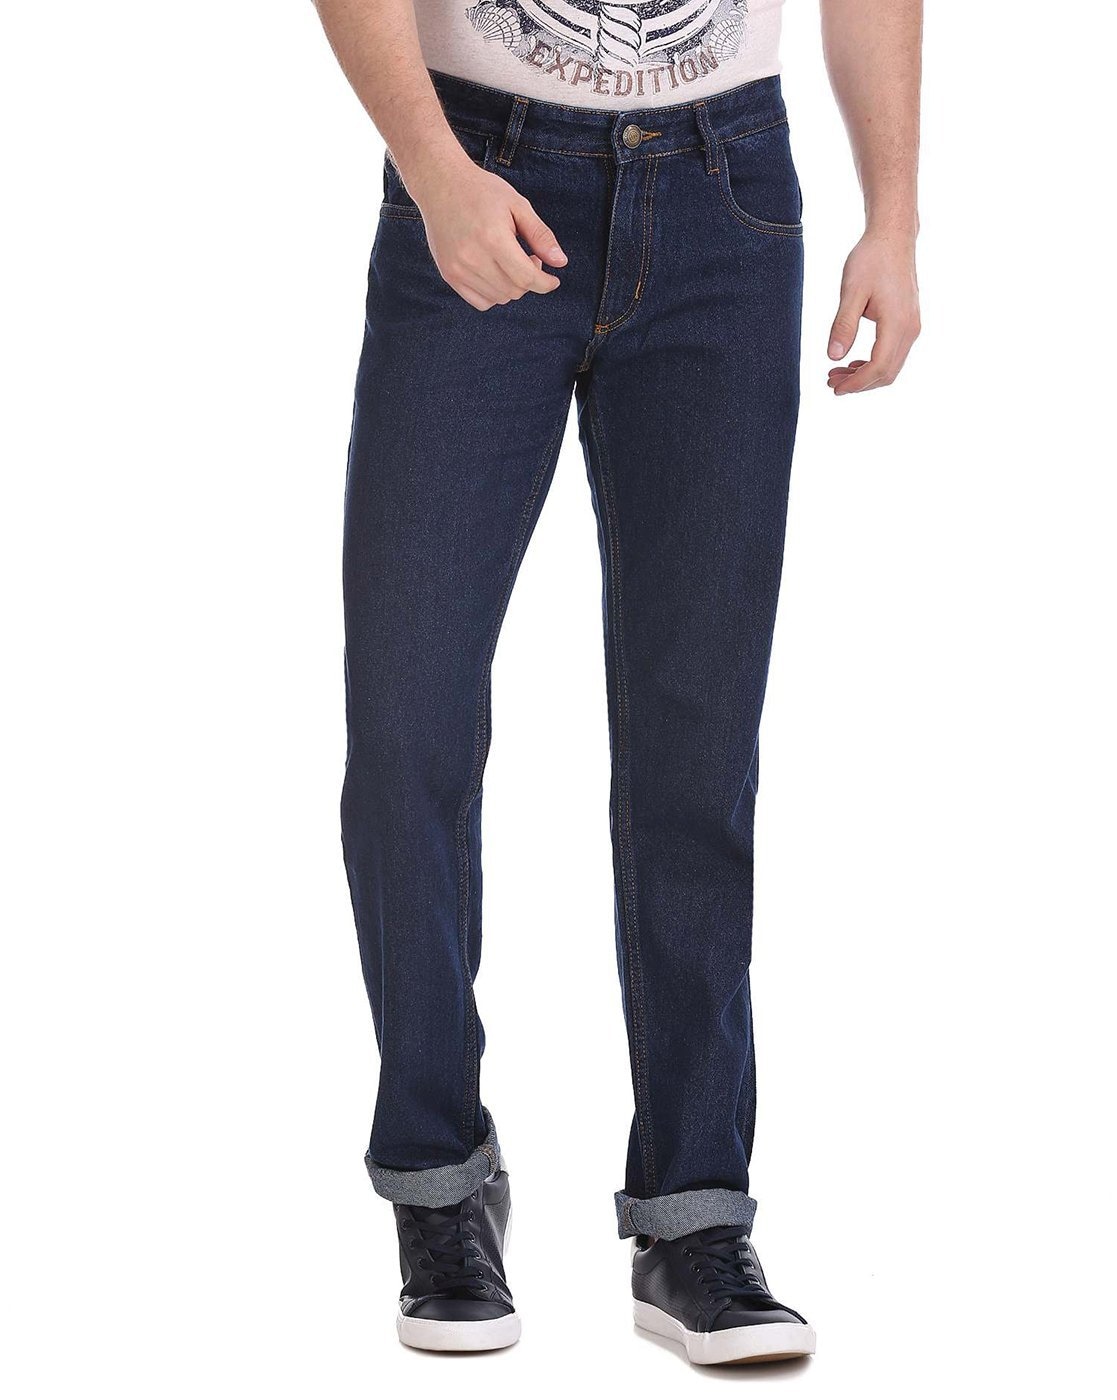 300 rs jeans online